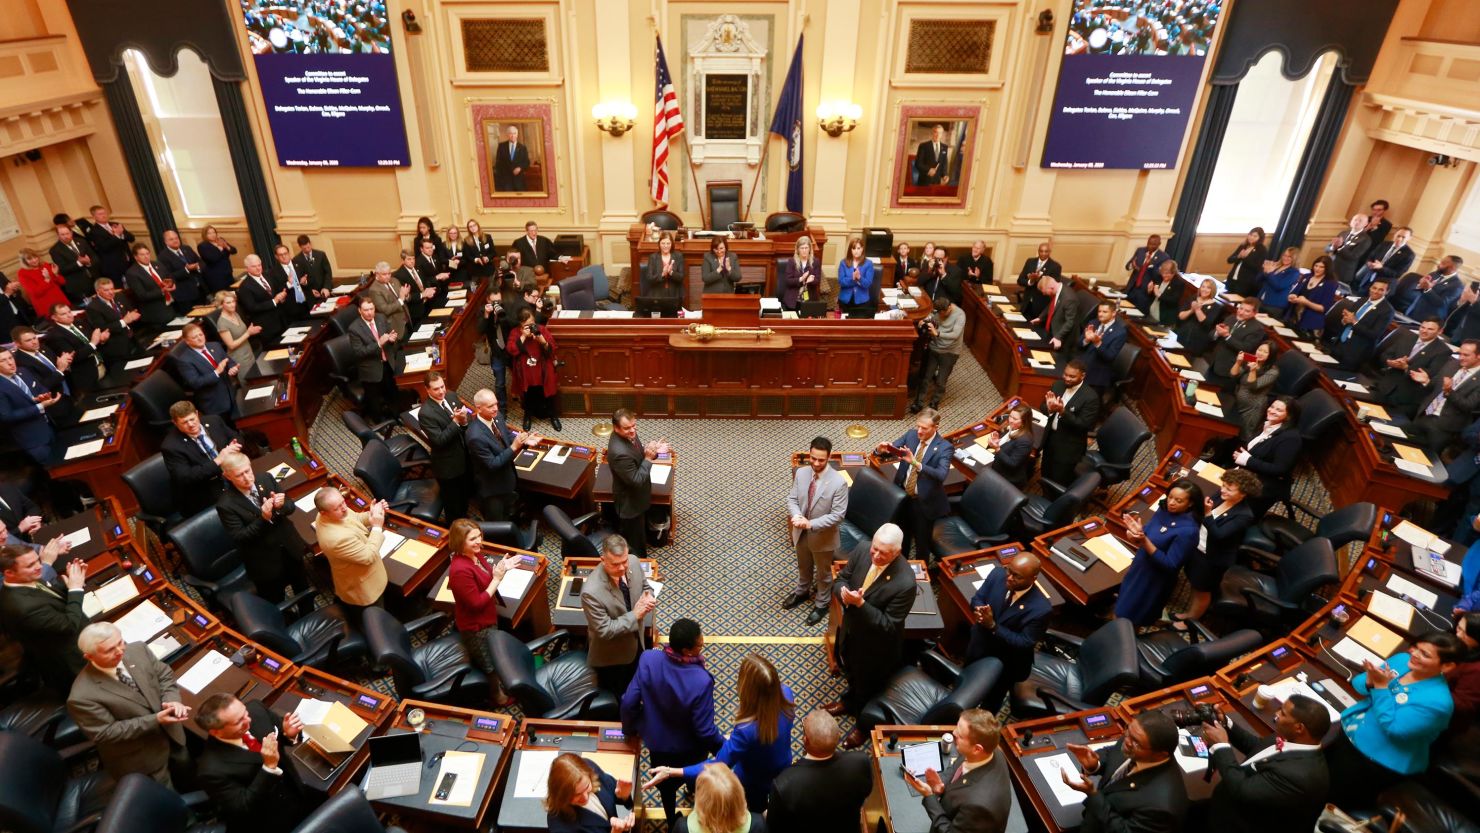 Virginia House of Delegates, Speaker Eileen Filler-Corn, D-Fairfax, center, is escorted to the rostrum during opening ceremonies of the 2020 Virginia General Assembly at the Capitol in Richmond, Virginia, in January 2020. Filler-Corn is the first woman to hold the position. 